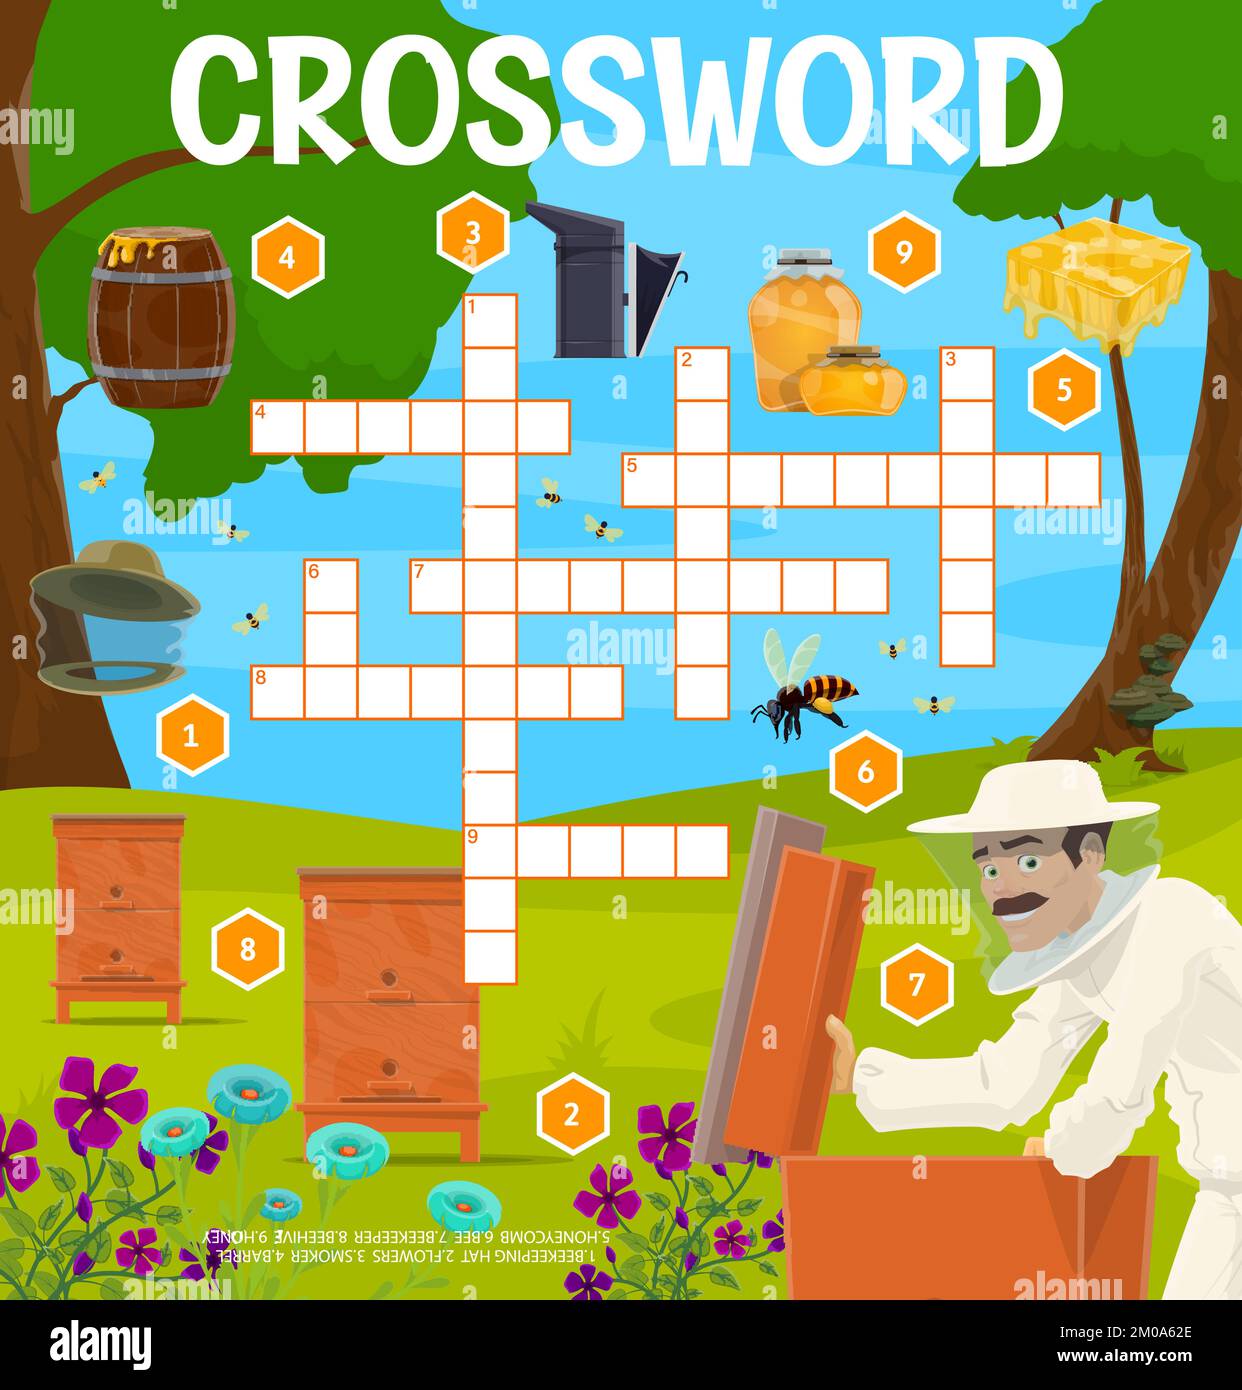 Beekeeping and apiary crossword grid worksheet. Find a word quiz vector game puzzle with cartoon beehives, honey, bee, honeycomb and beekeeper, beekeeping hat, smoker. Apiculture fill in squares game Stock Vector